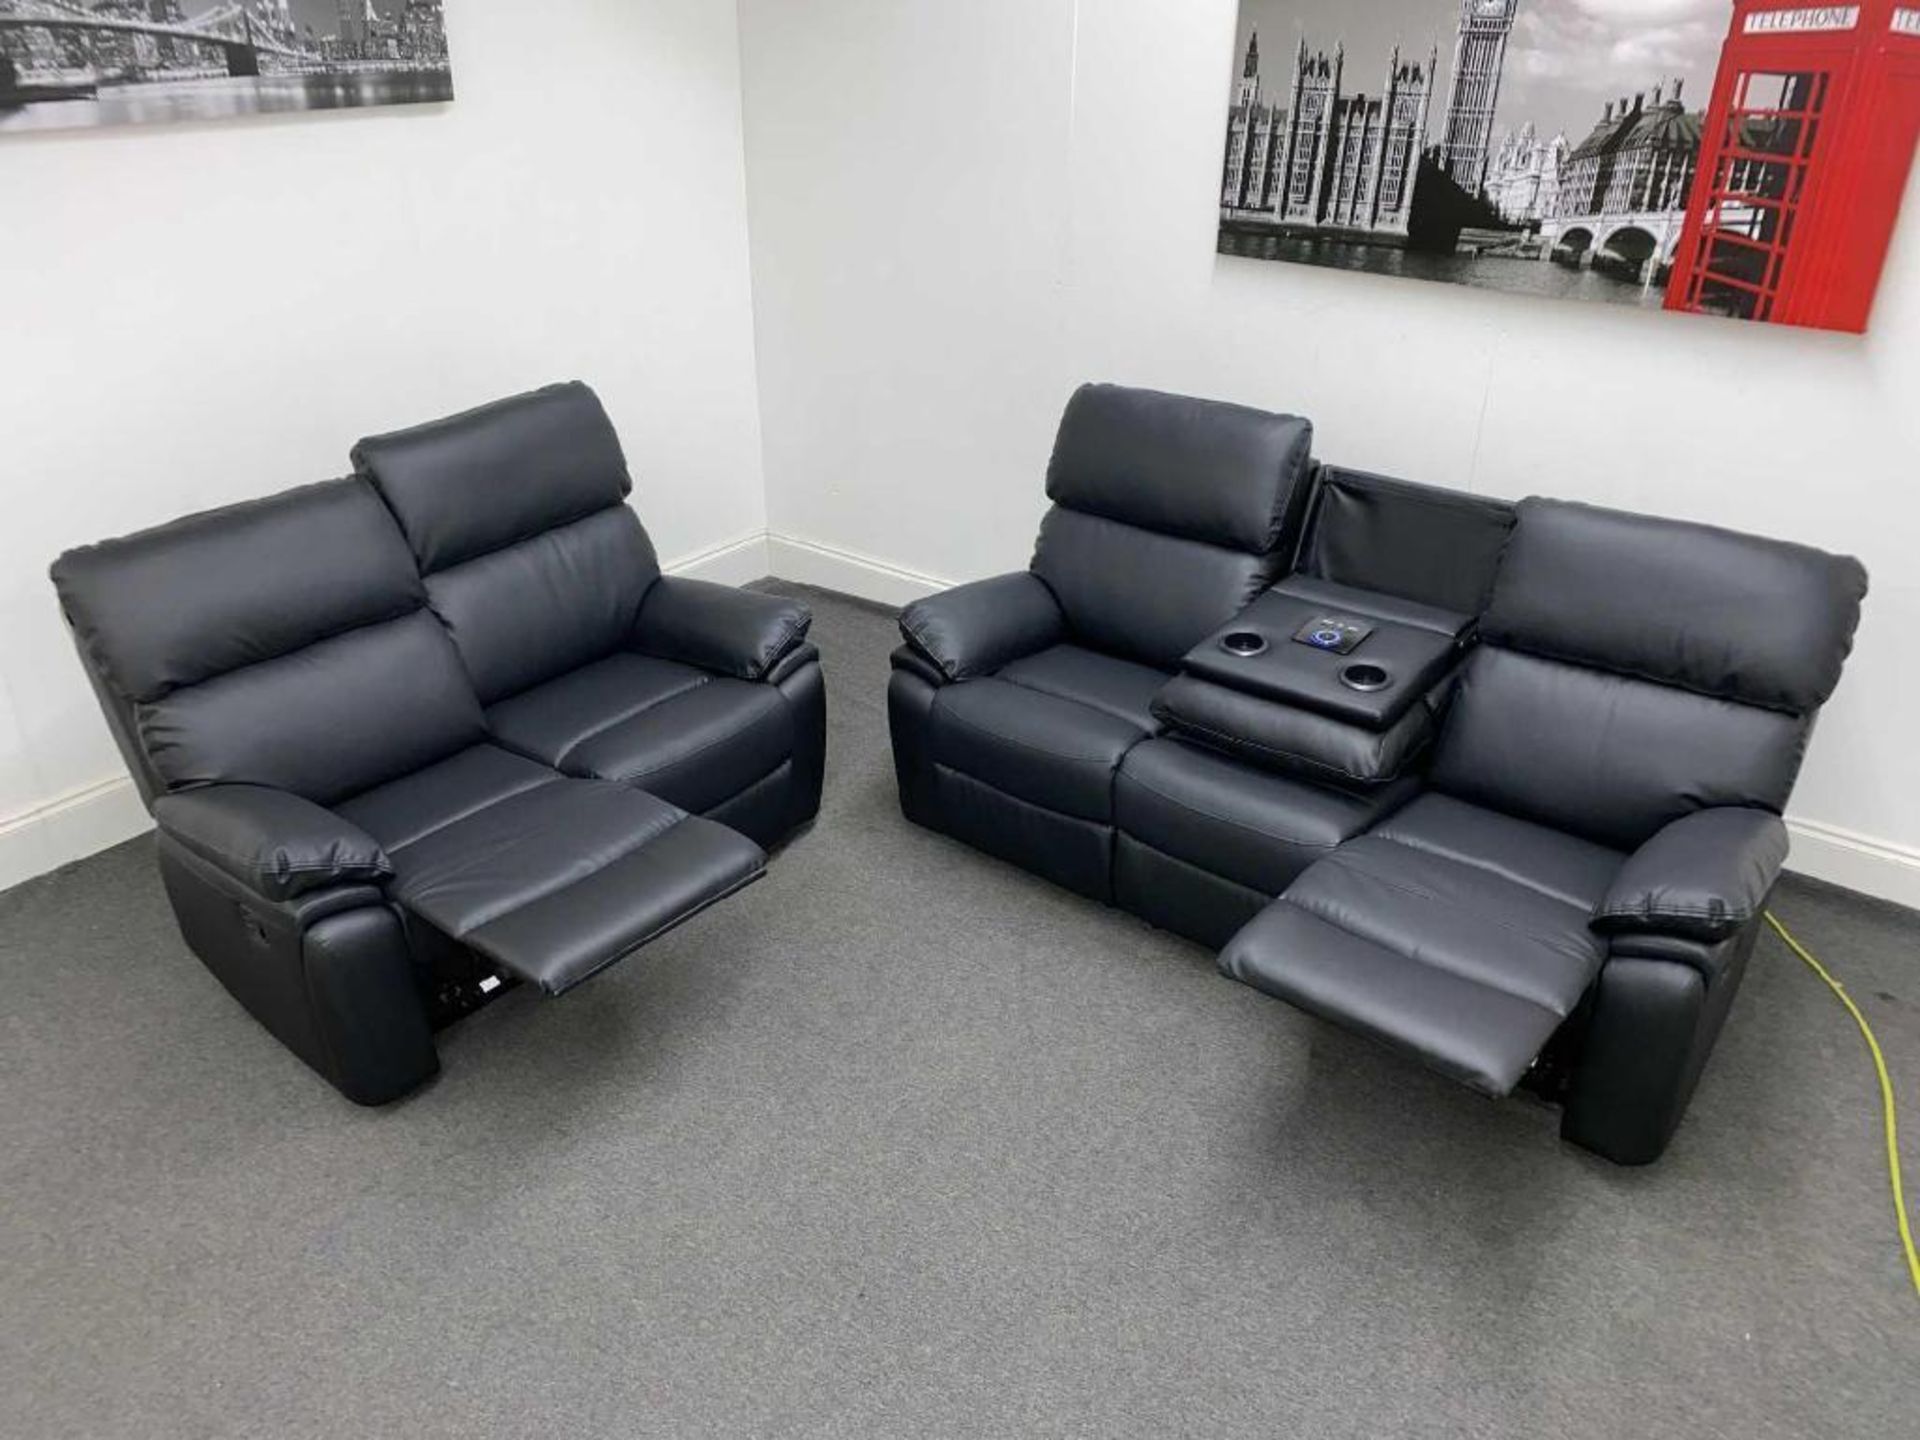 BRAND NEW stereo 3 + 2 seater leather manual reclining suite with stereo console. RRP: £1,999